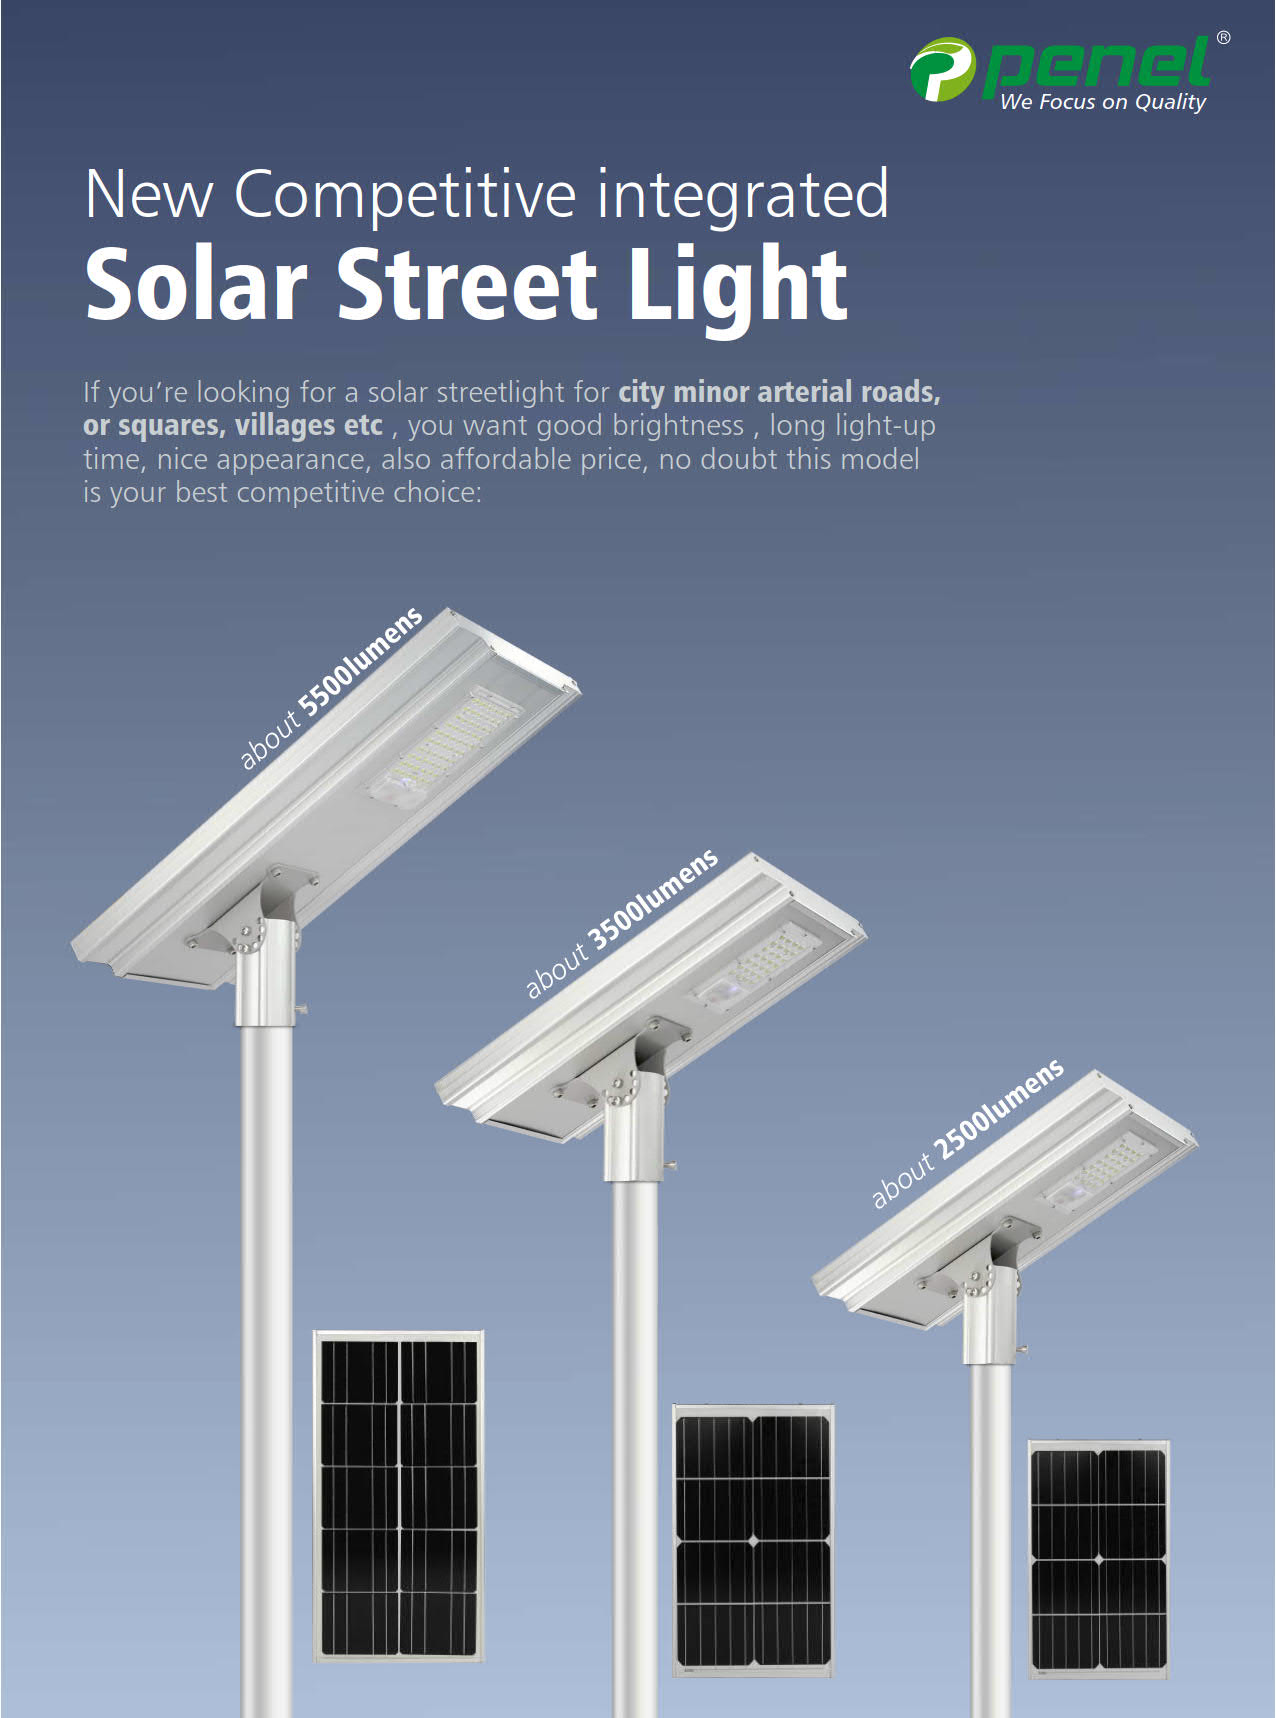 Datasheet of SST-07 (New competitive integrated Solar Street Light from PENEL)